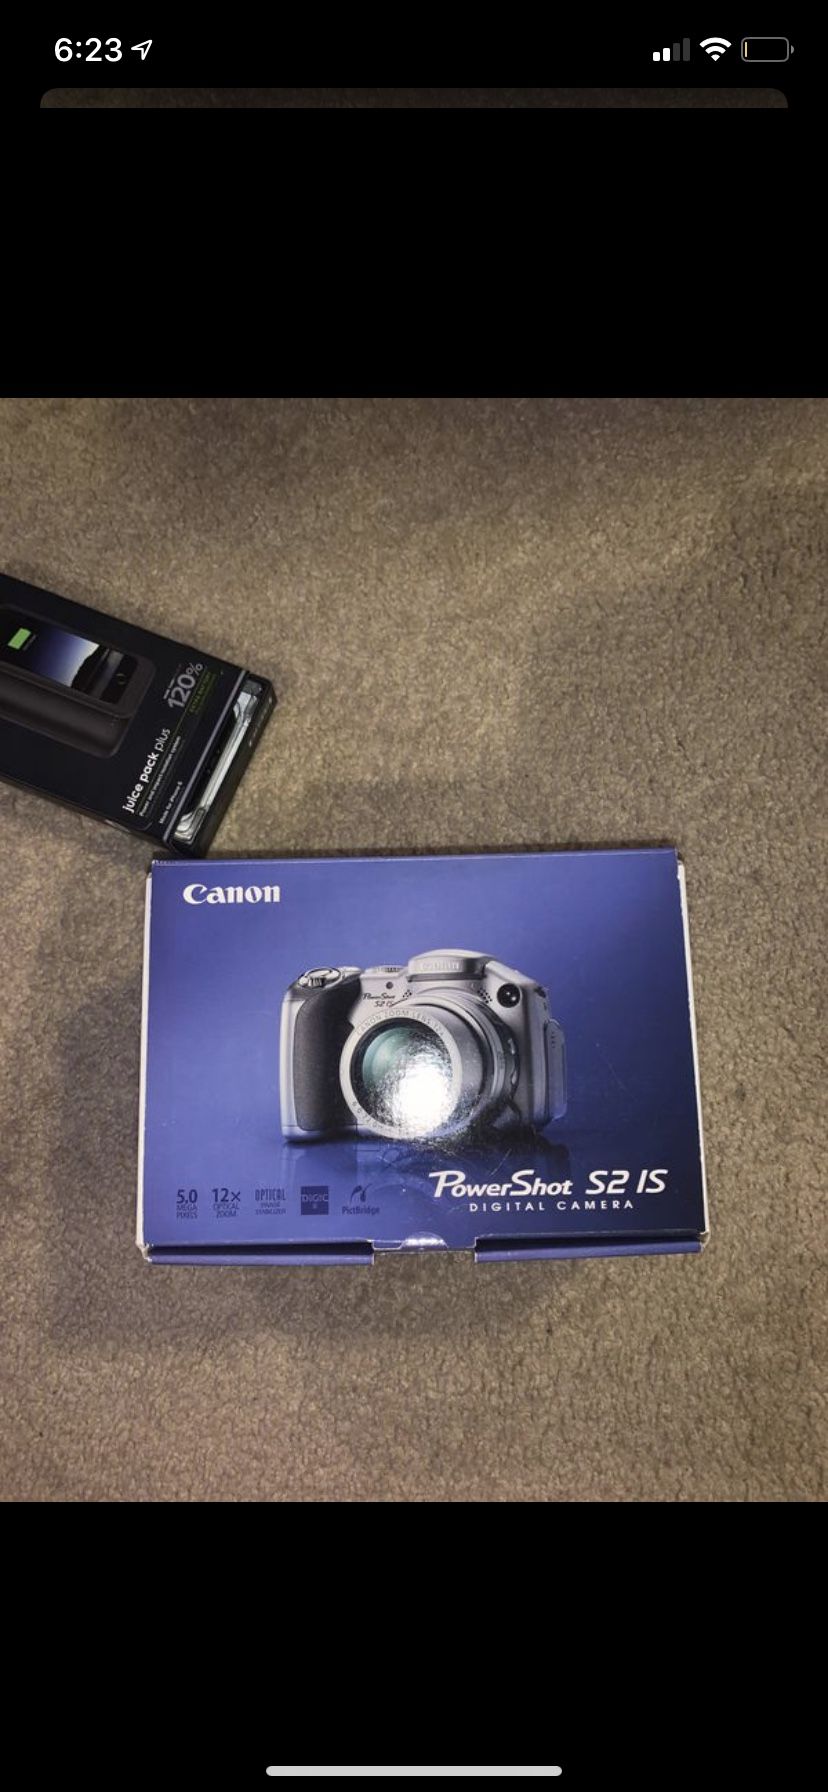 Canon PowerShot S2 IS Digital Camera - Never Used